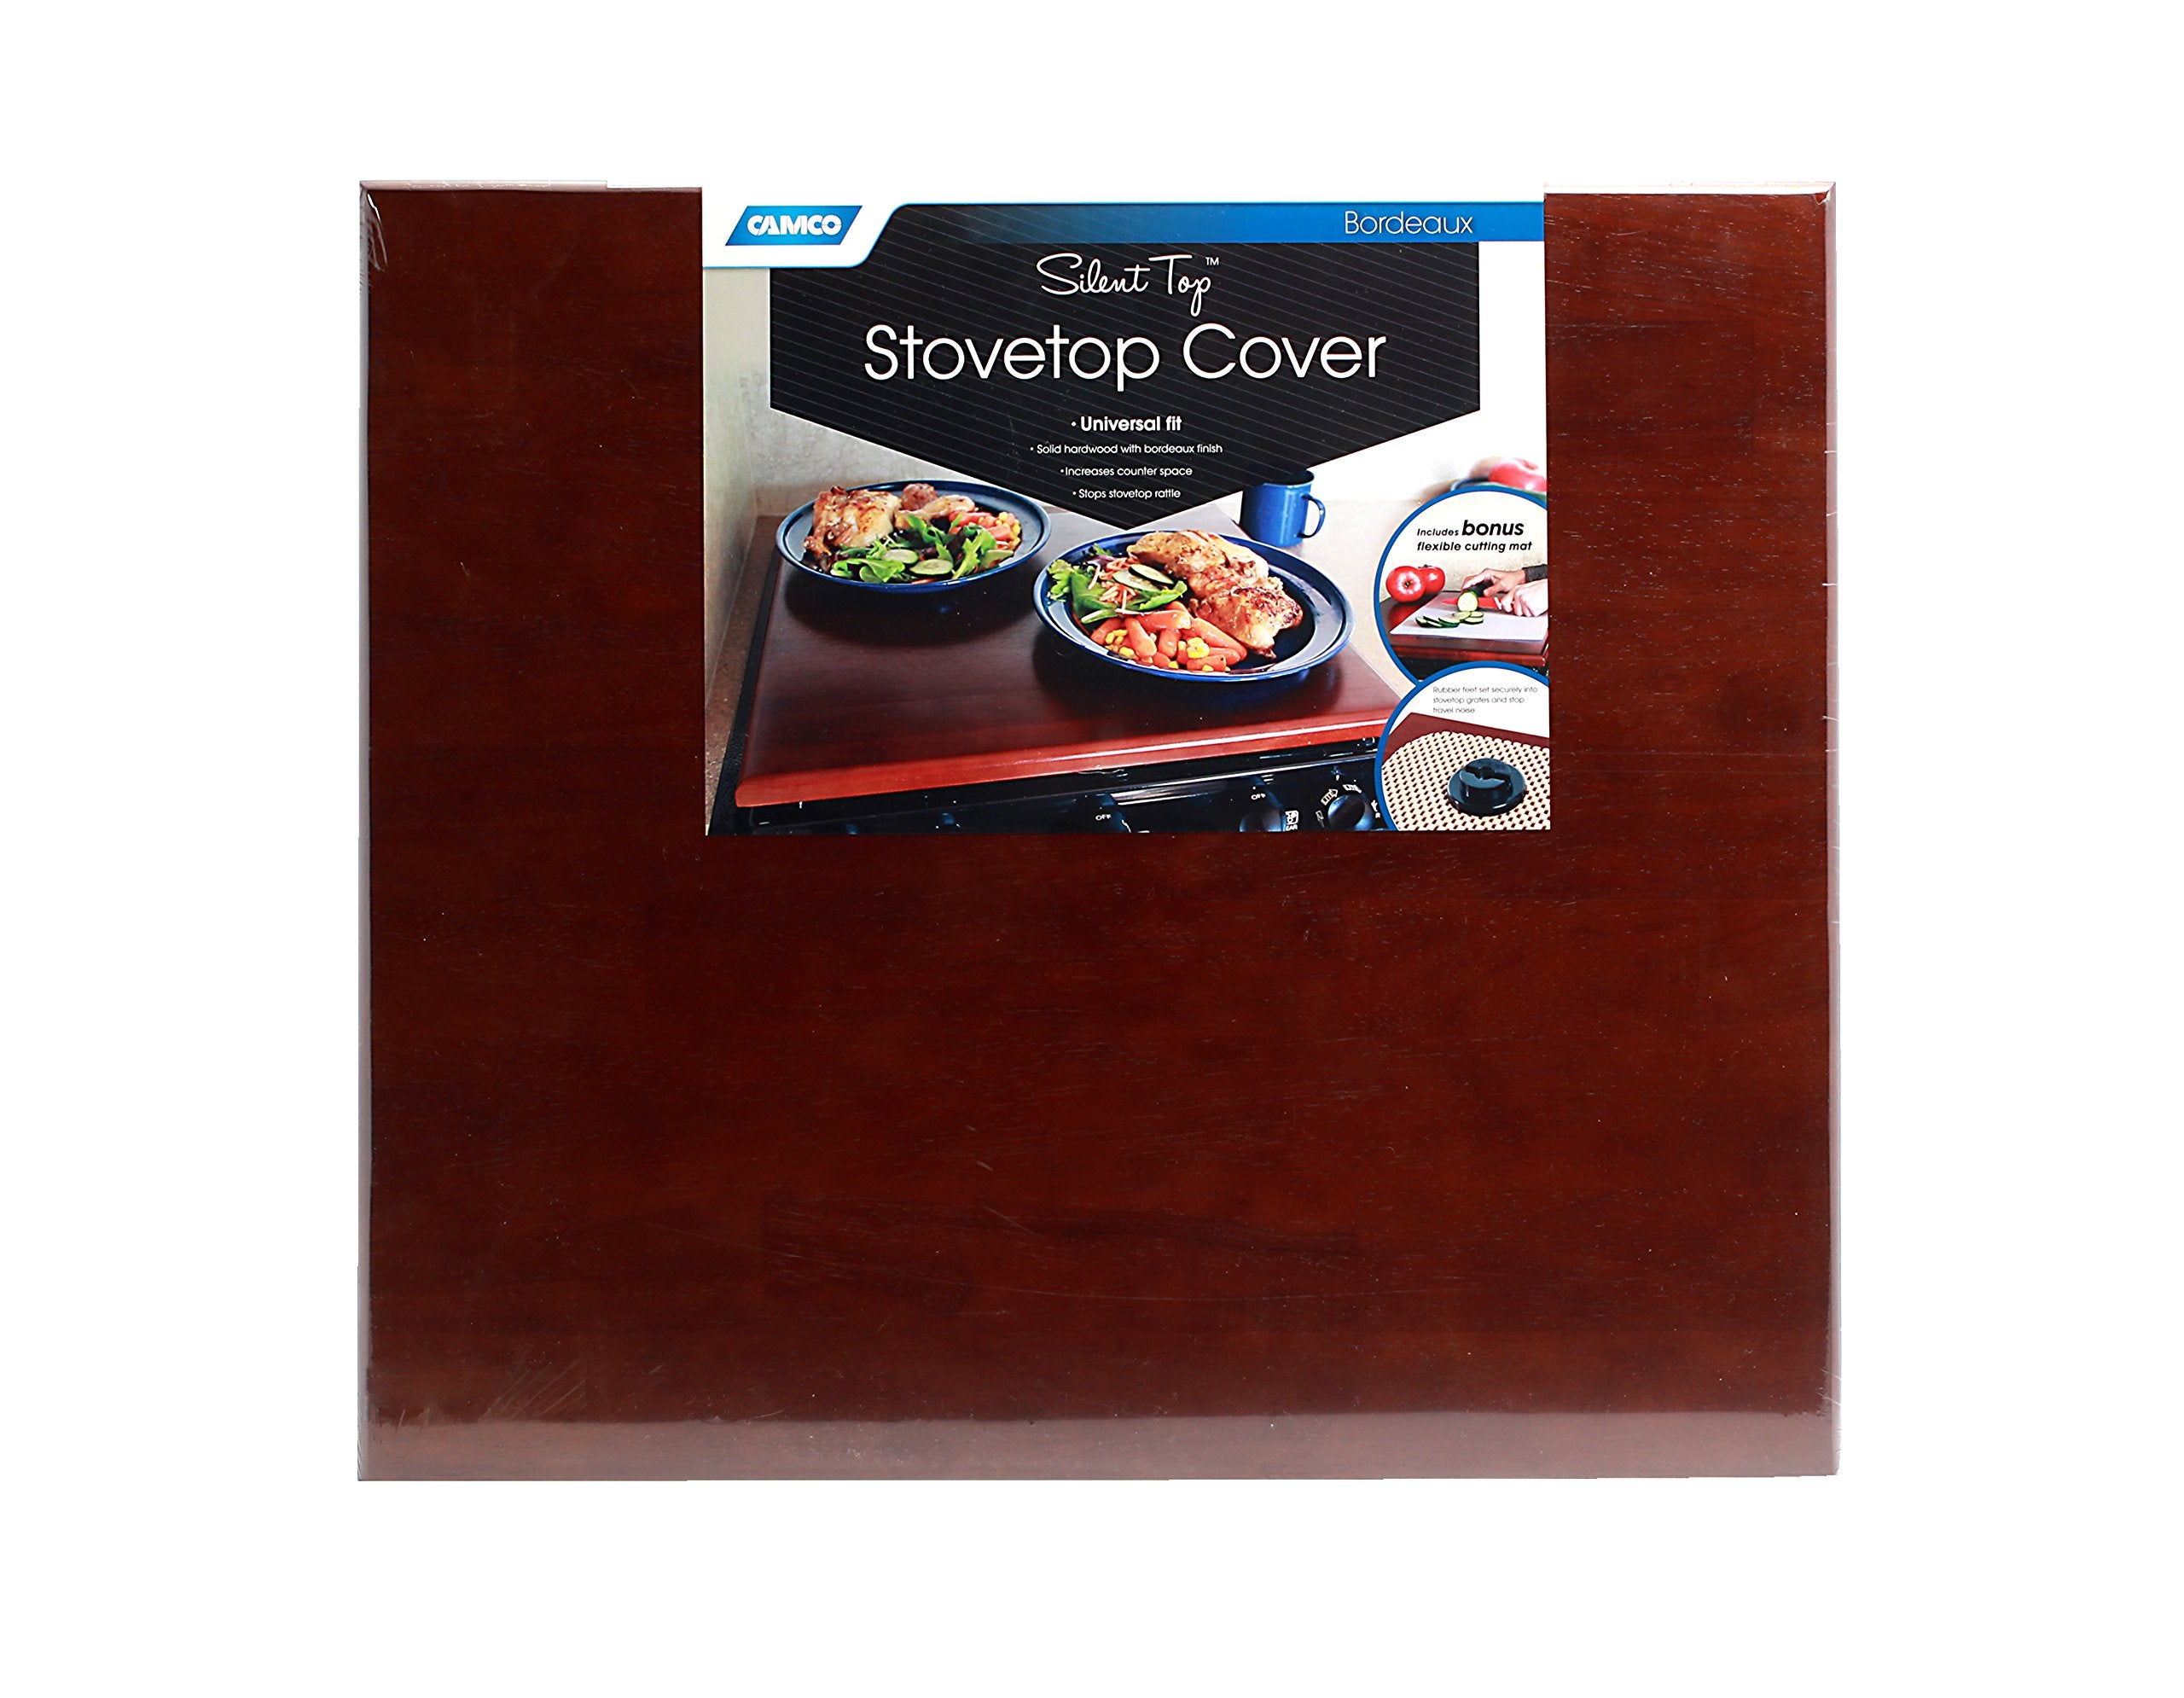 Camco 43526-A Silent Top Stovetop Cover, Convert Your Stove Top to Extra Counter Space In Your Camper Or RV (Bordeaux Finish)